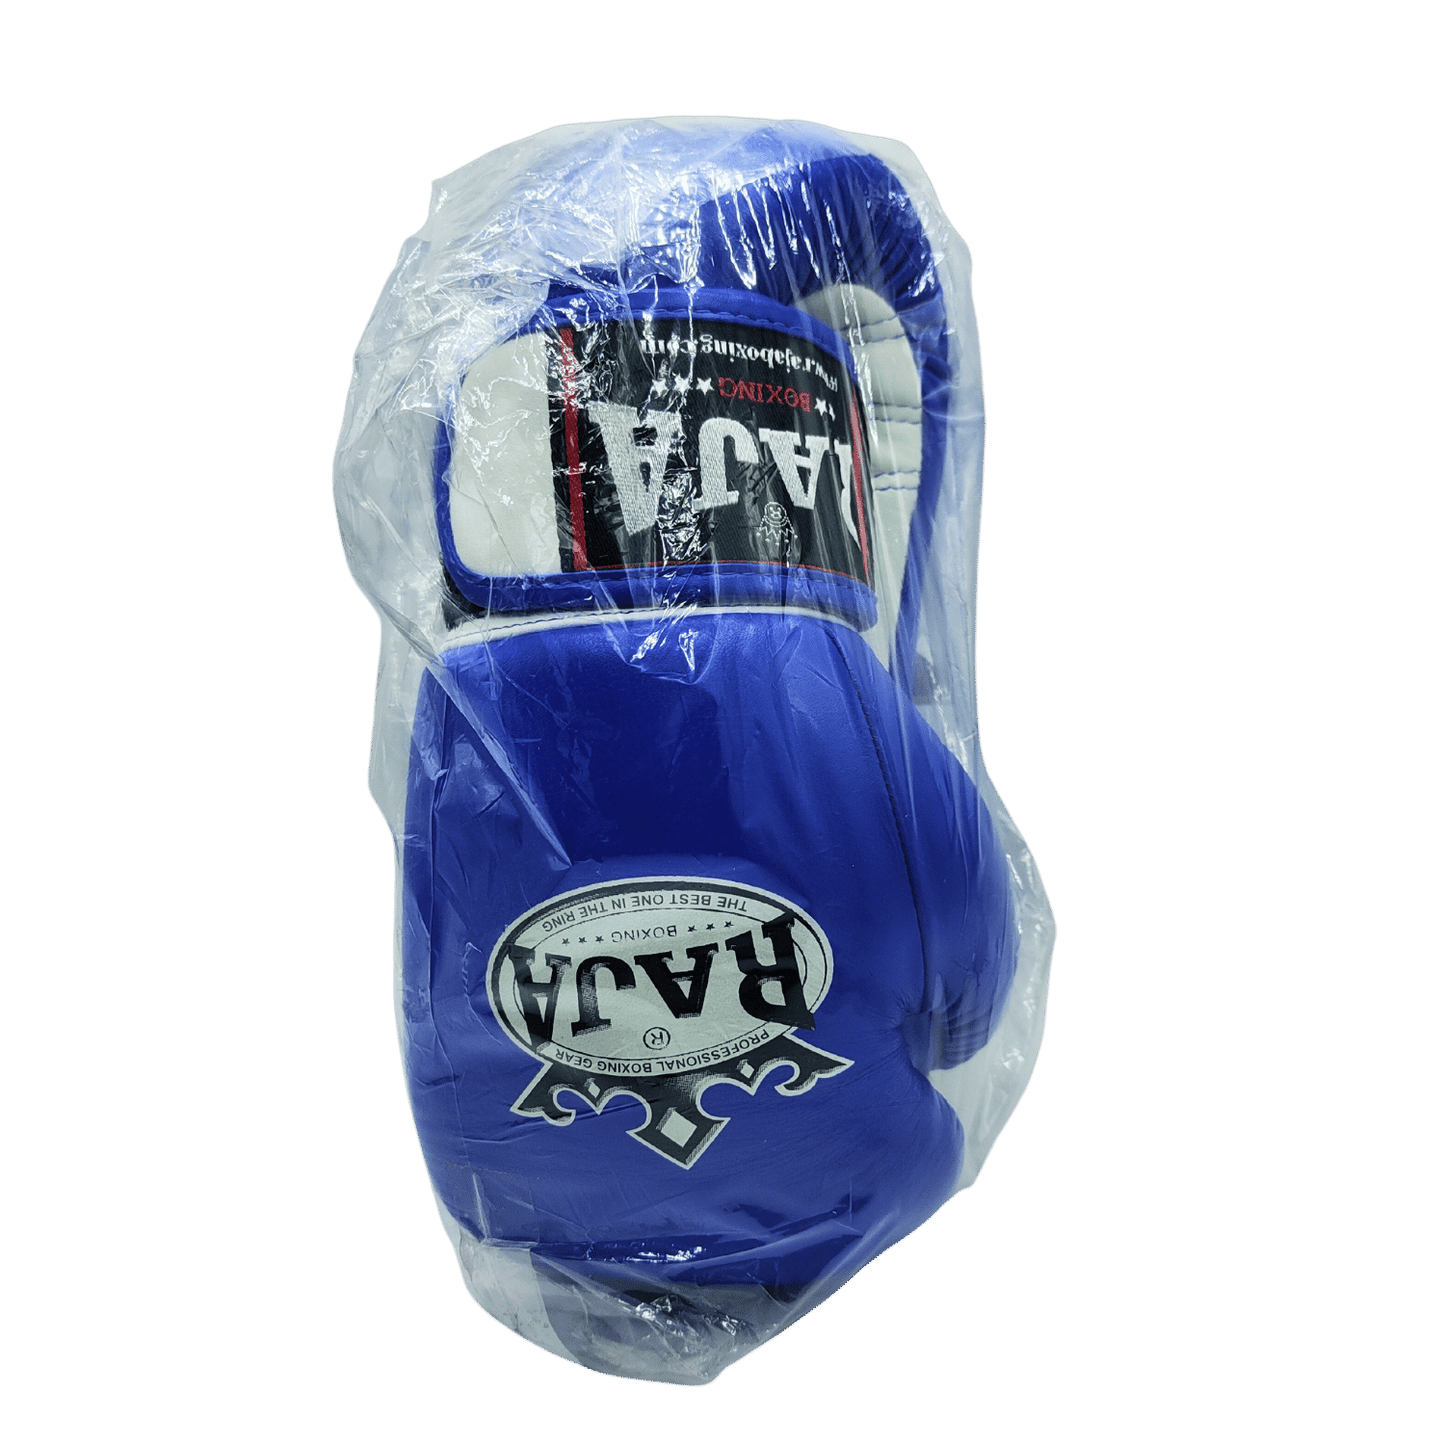 Raja Duo Colour 8oz Boxing Gloves - Blue & White in a plastic bag.